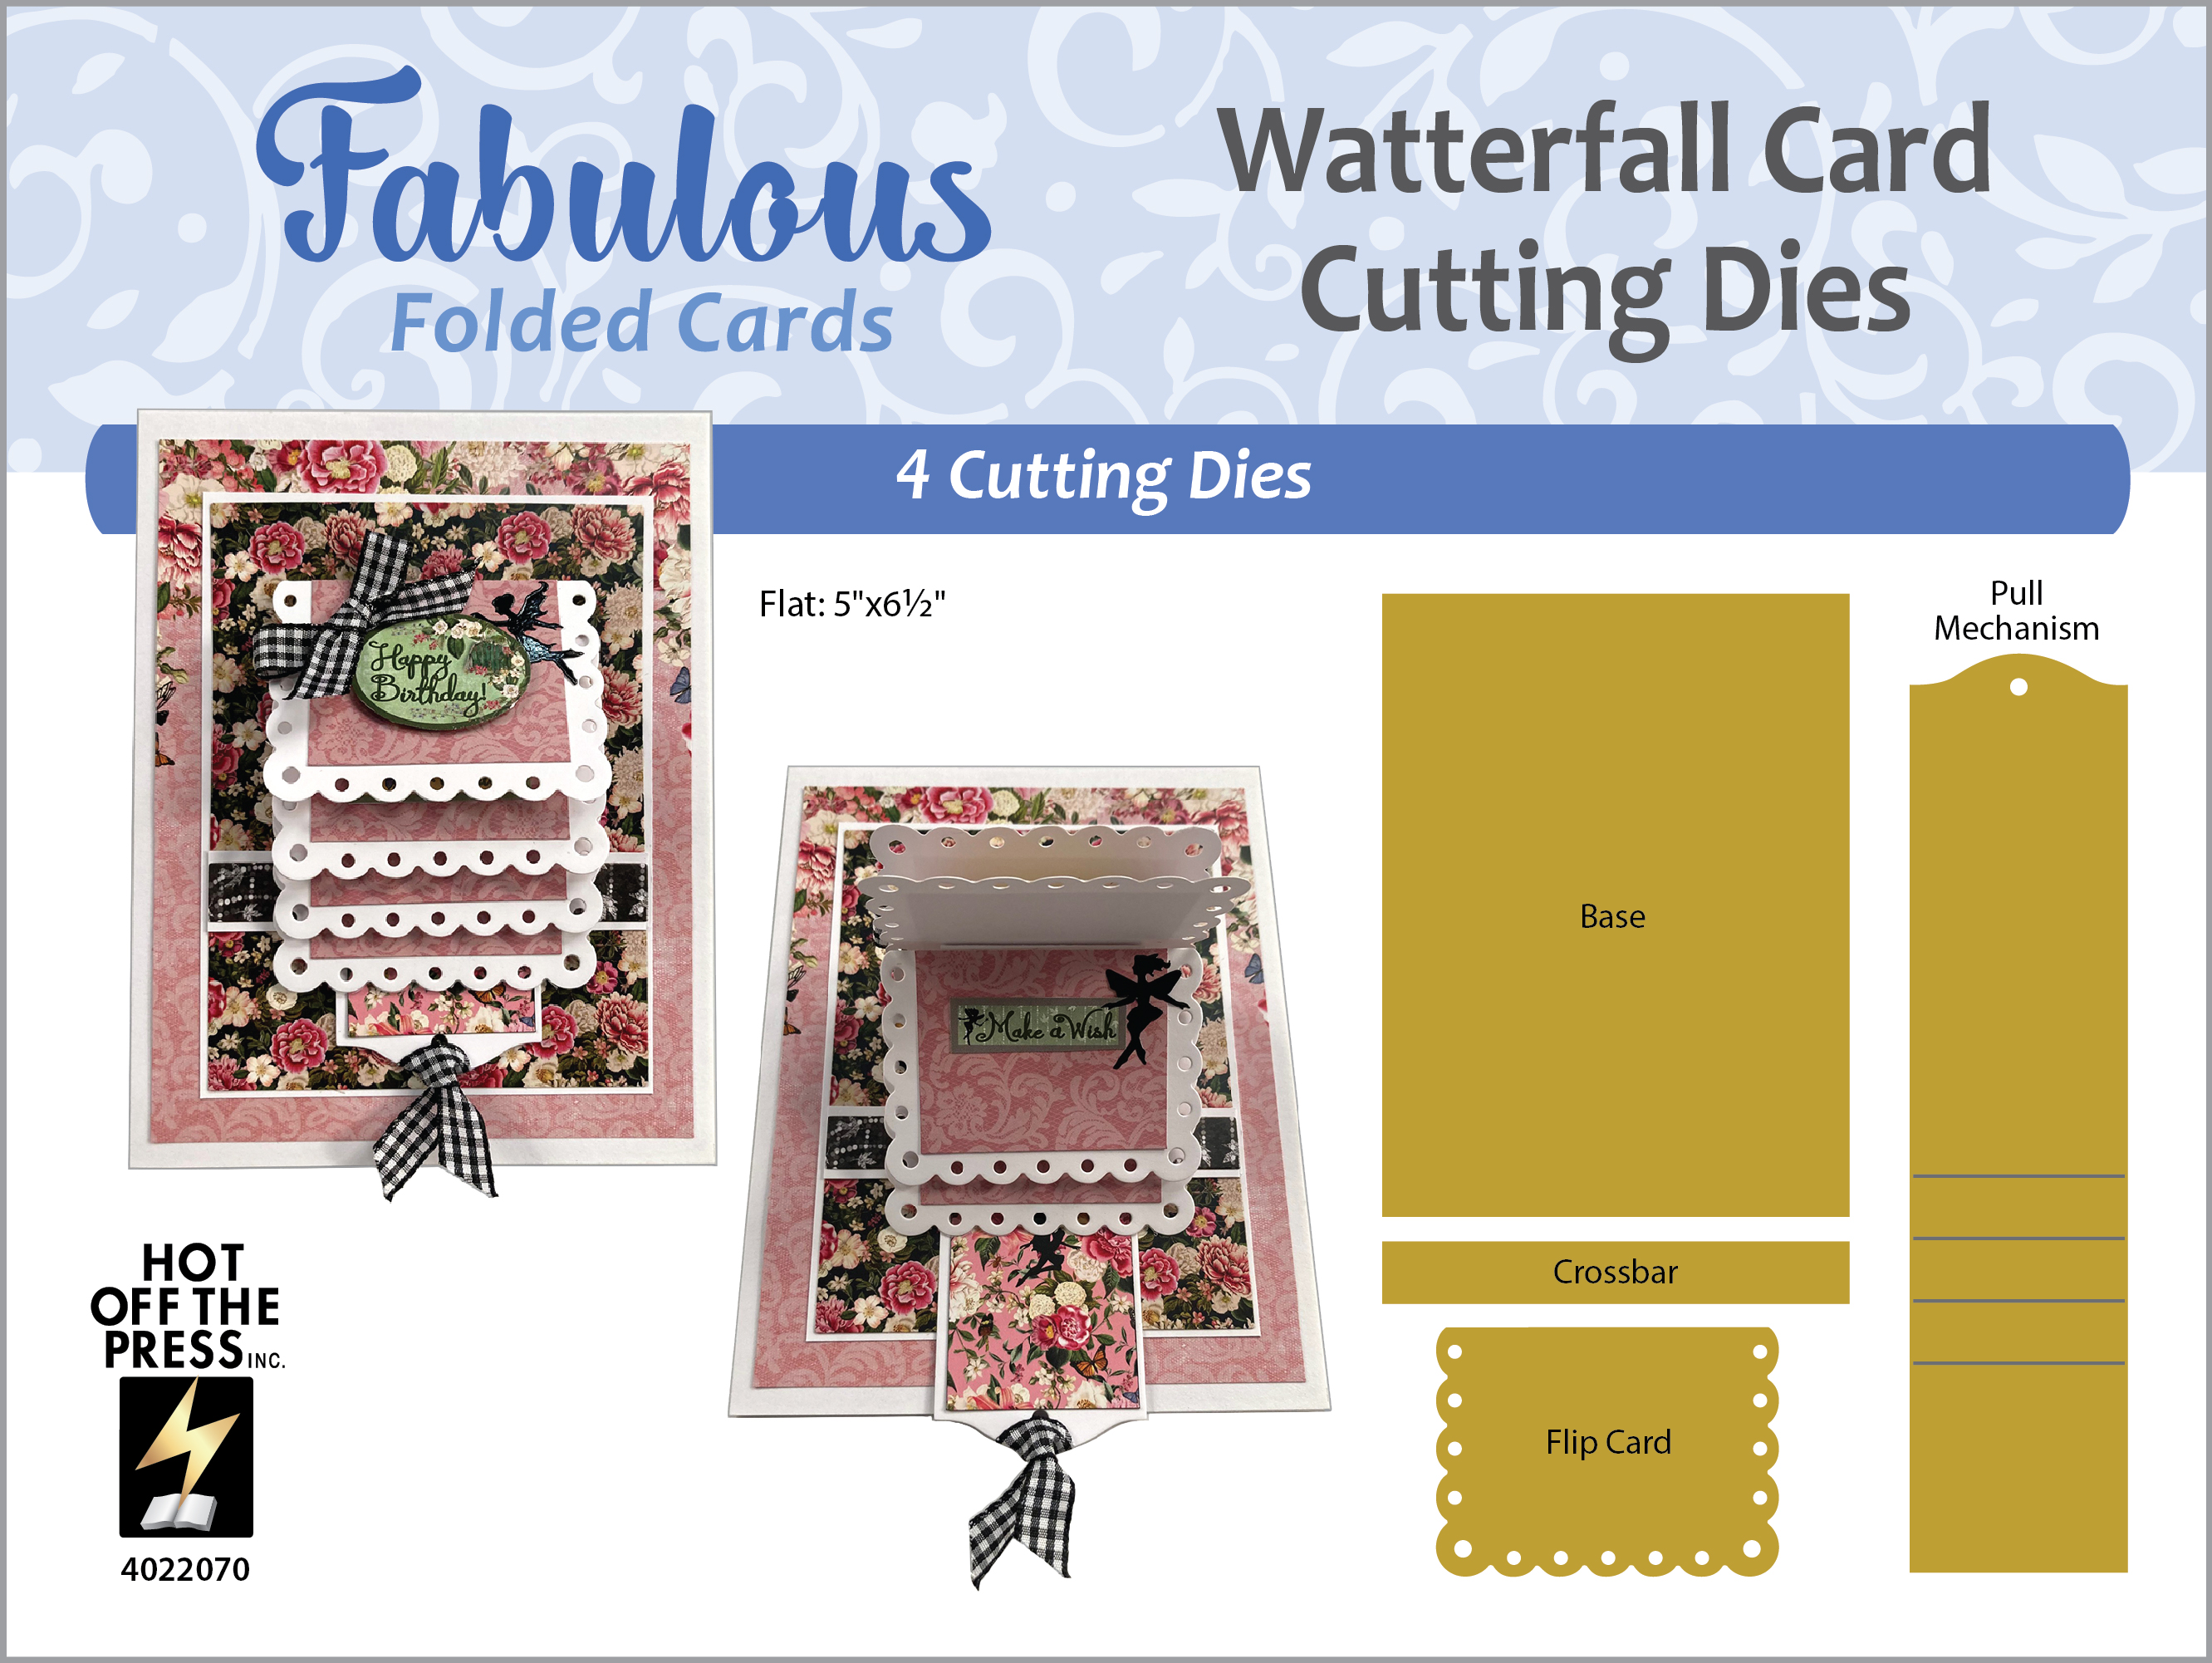 Waterfall Card Cutting Dies by Fabulous Folded Cards